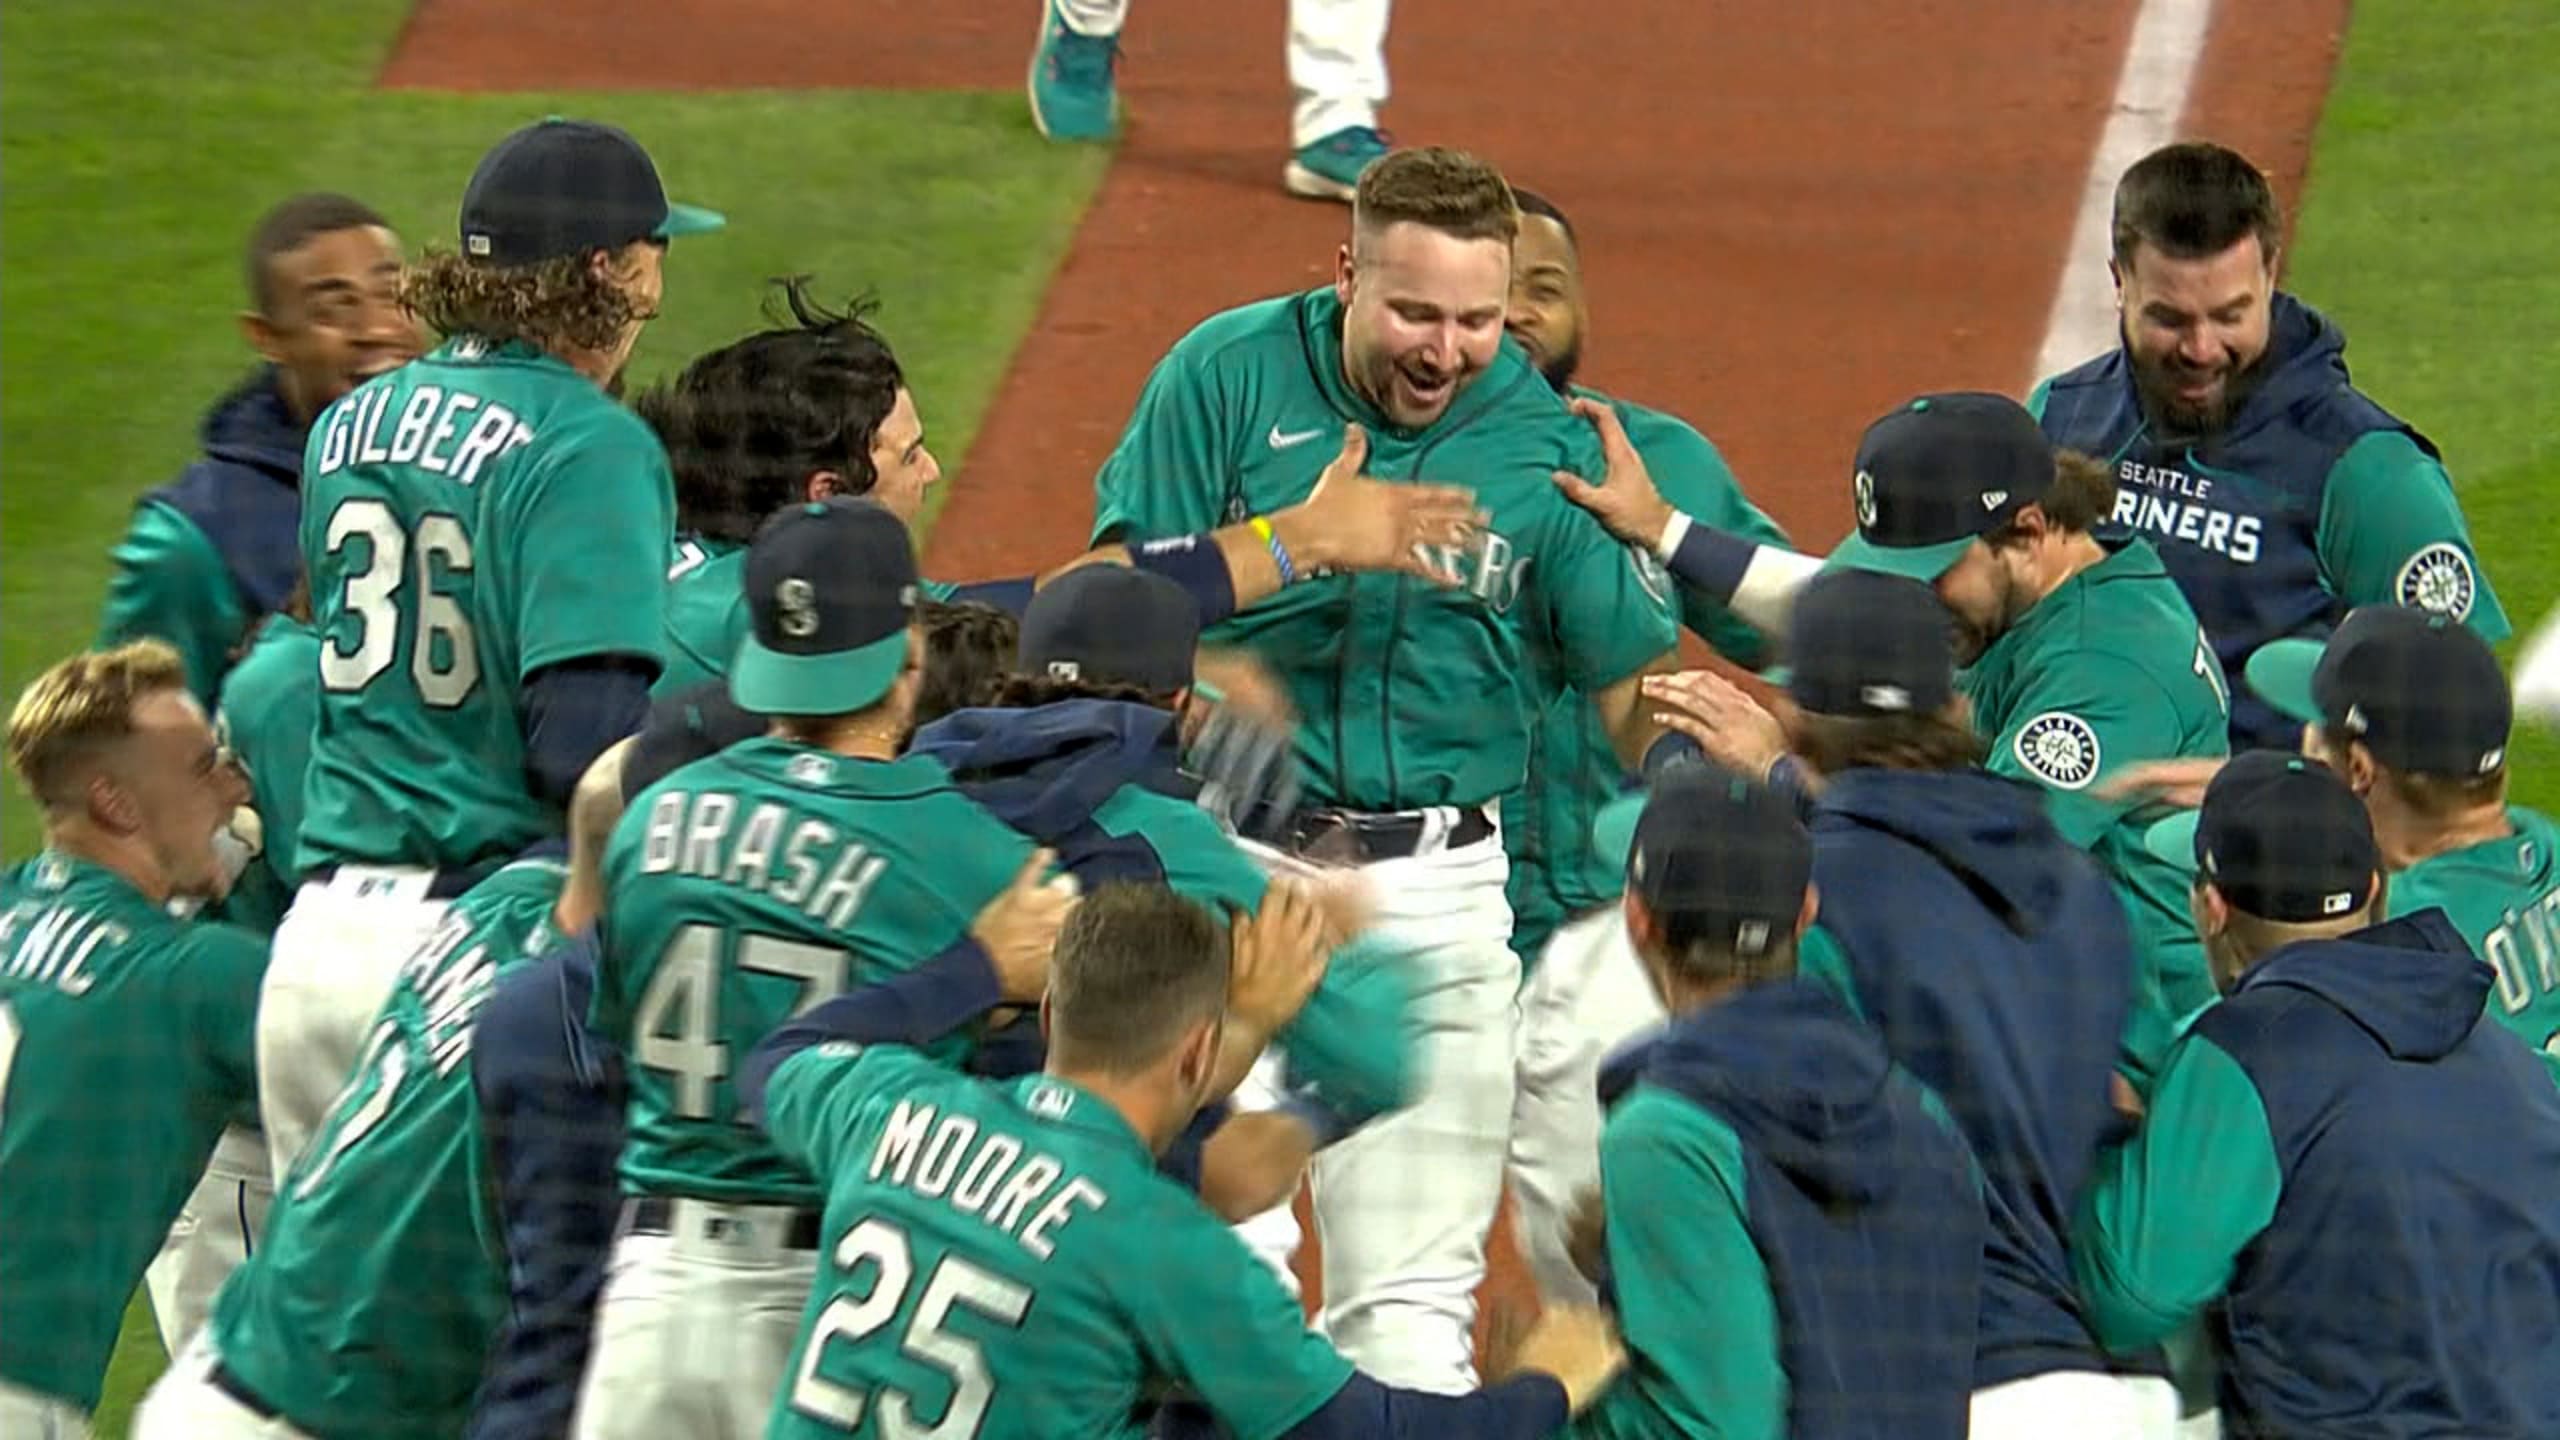 Teammate of Cal Raleigh raves about Mariners hero's big leap